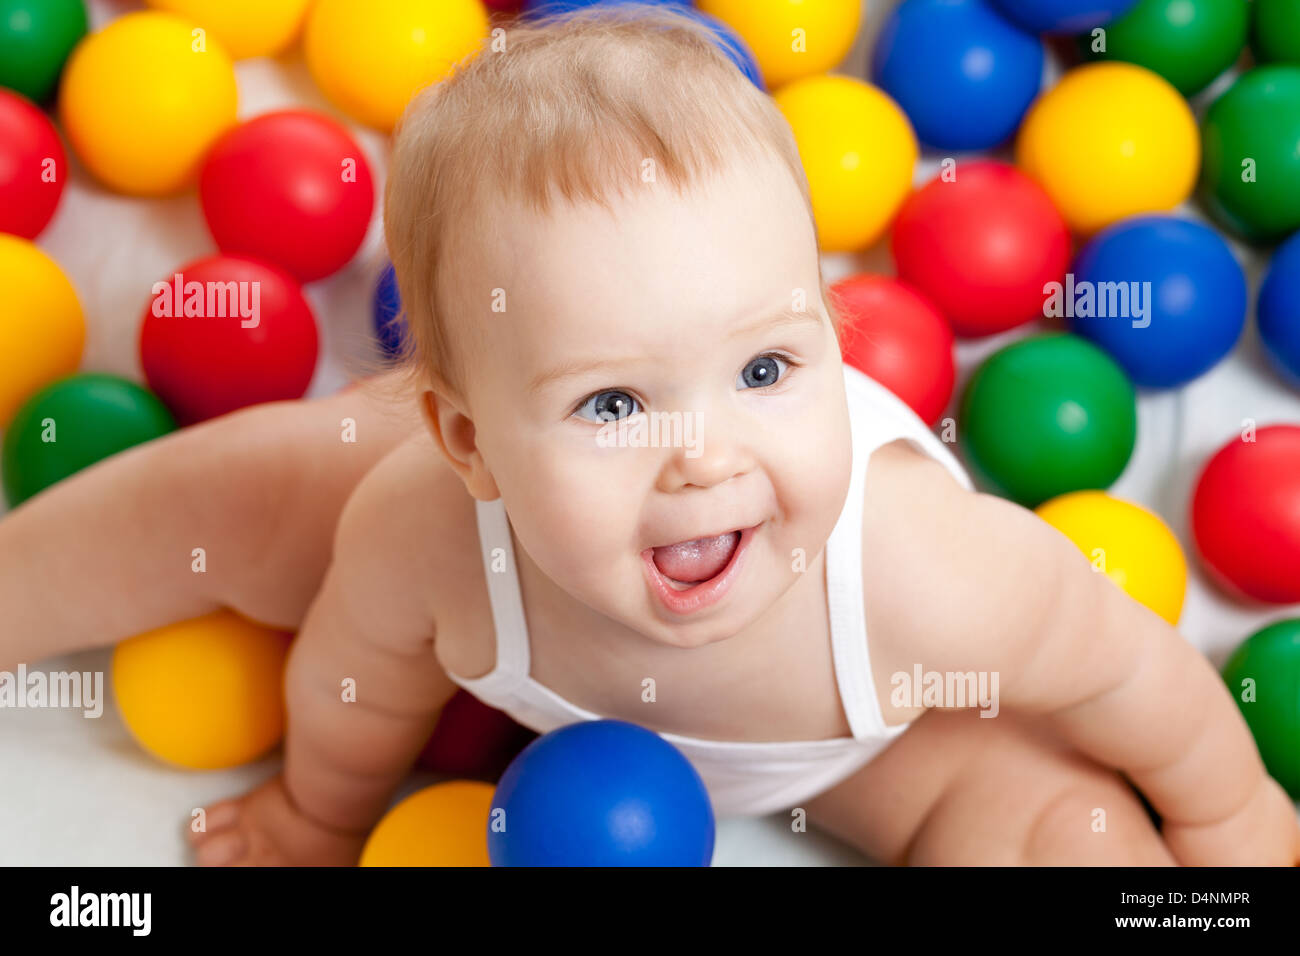 Portrait of a adorable infant sitting among colorful balls Stock Photo